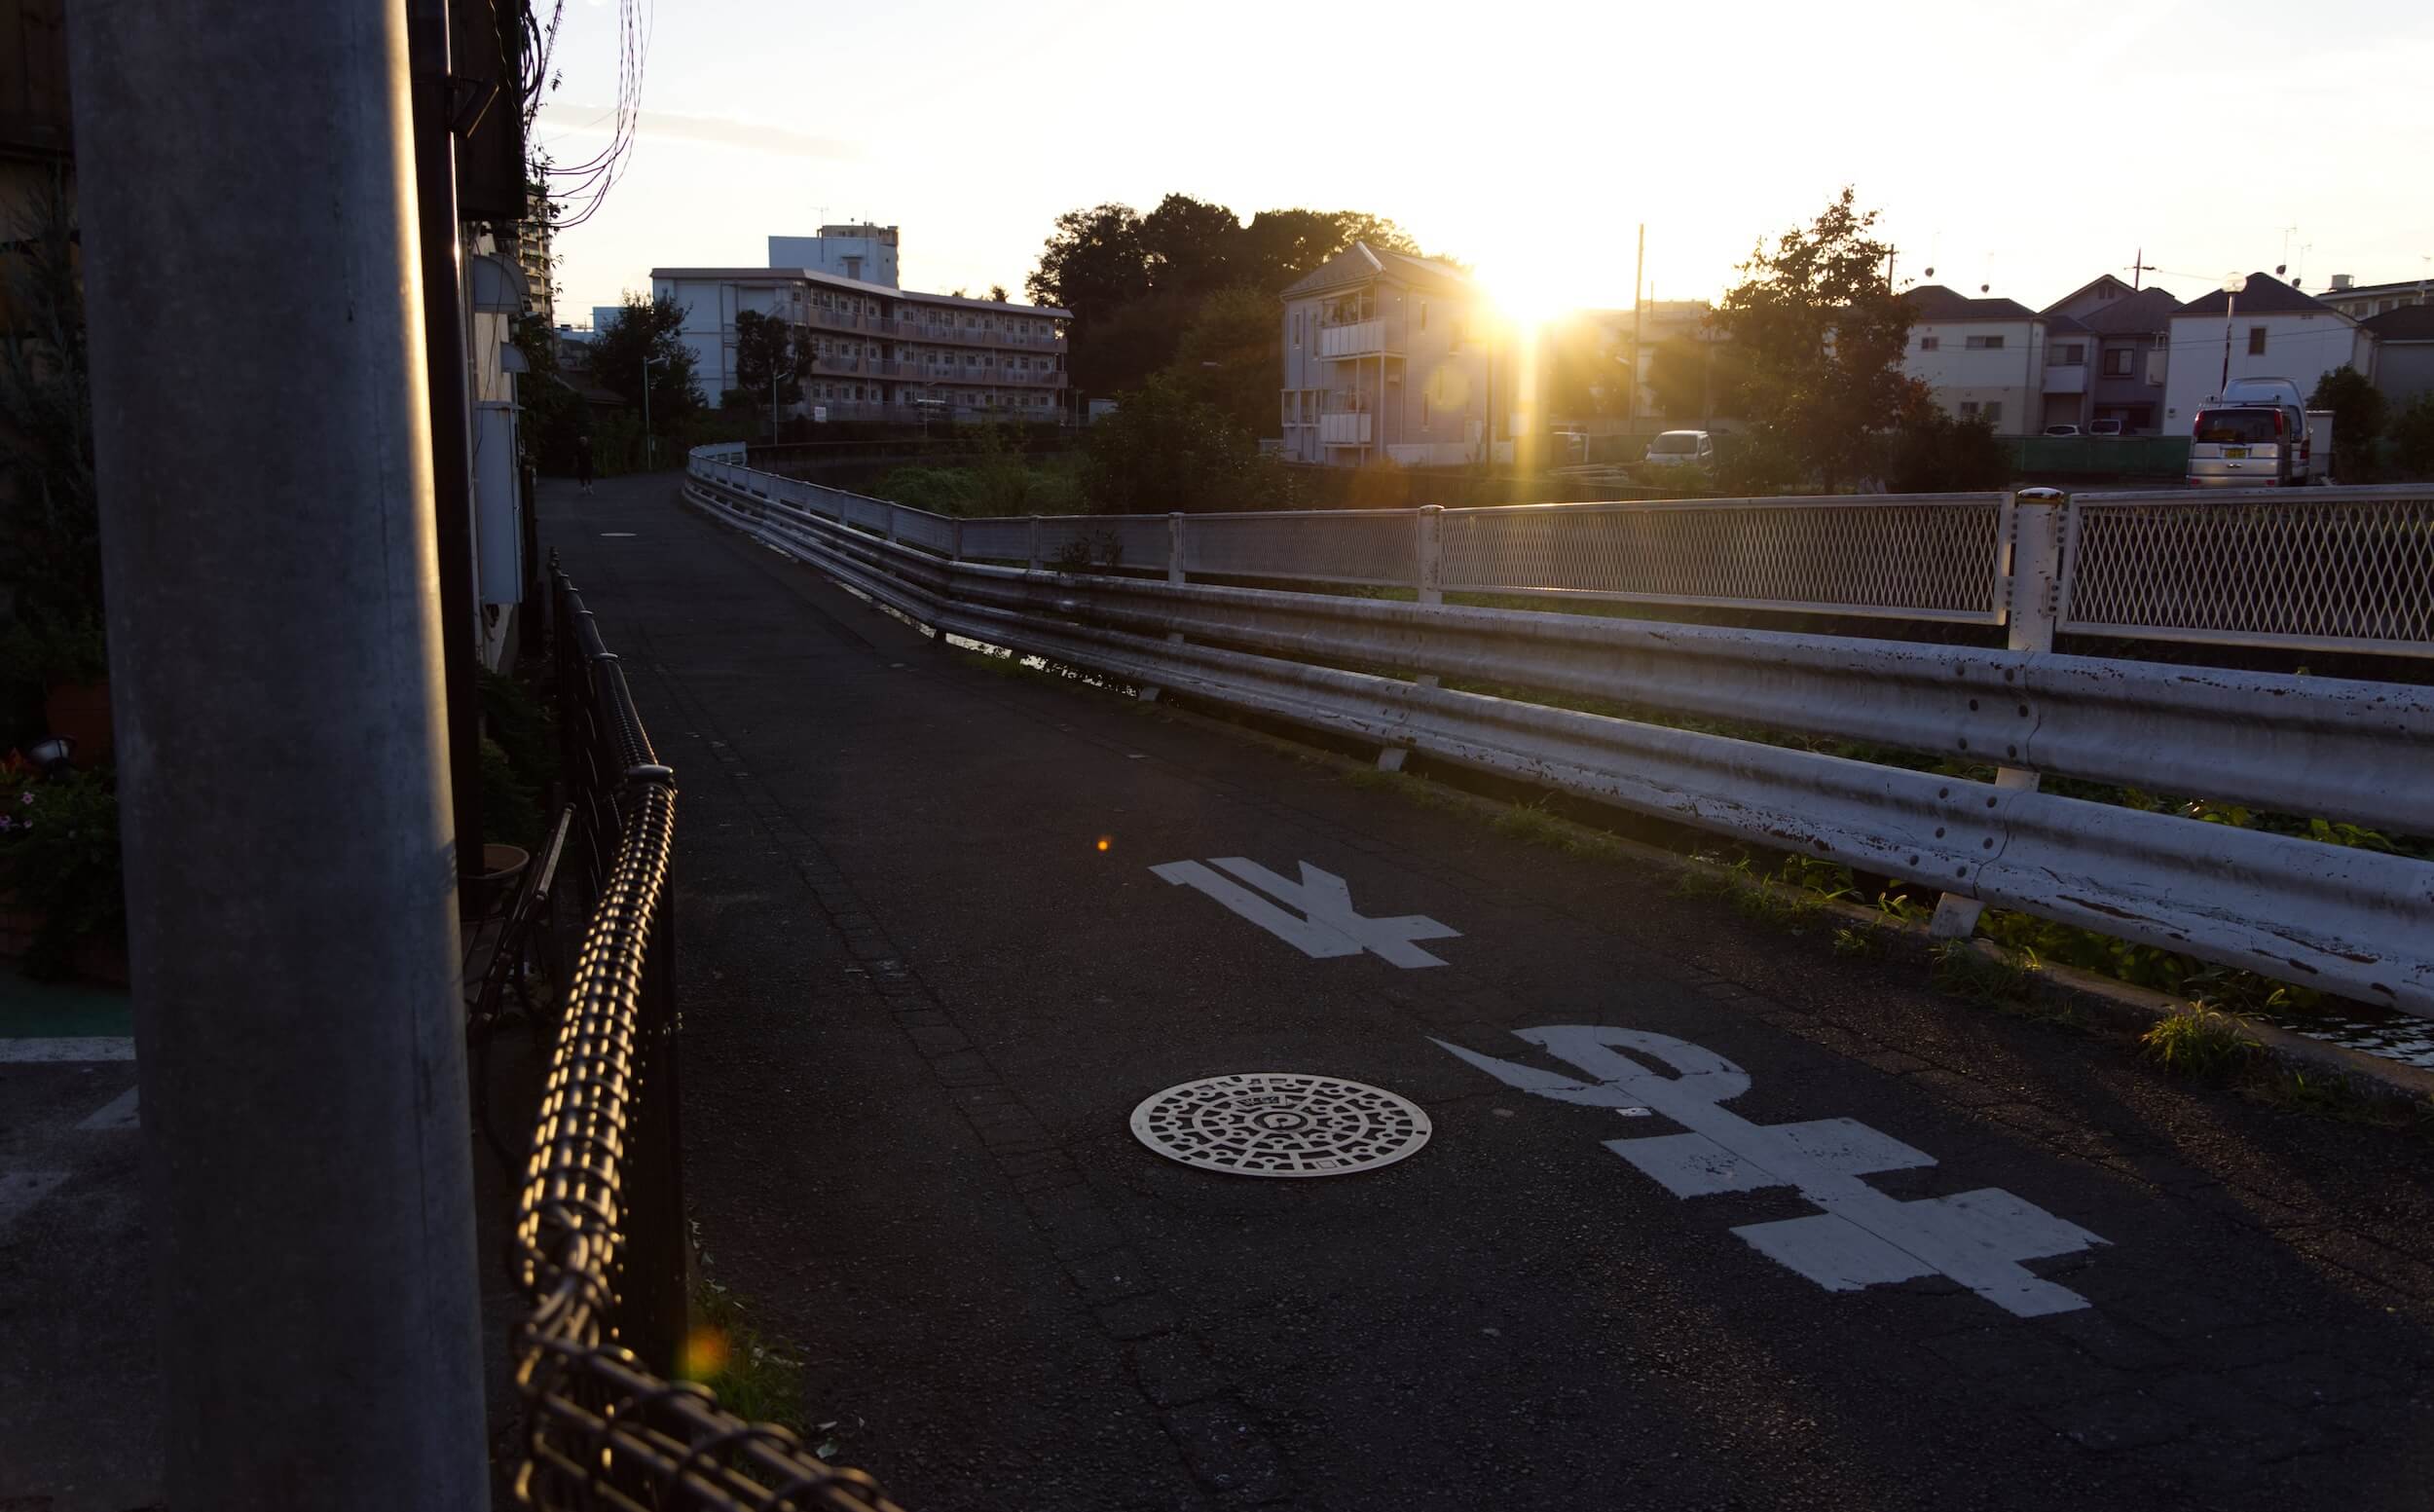 A road runs alongside a river at sunset. The street is in shadow and the light catches the edges of fences and railings